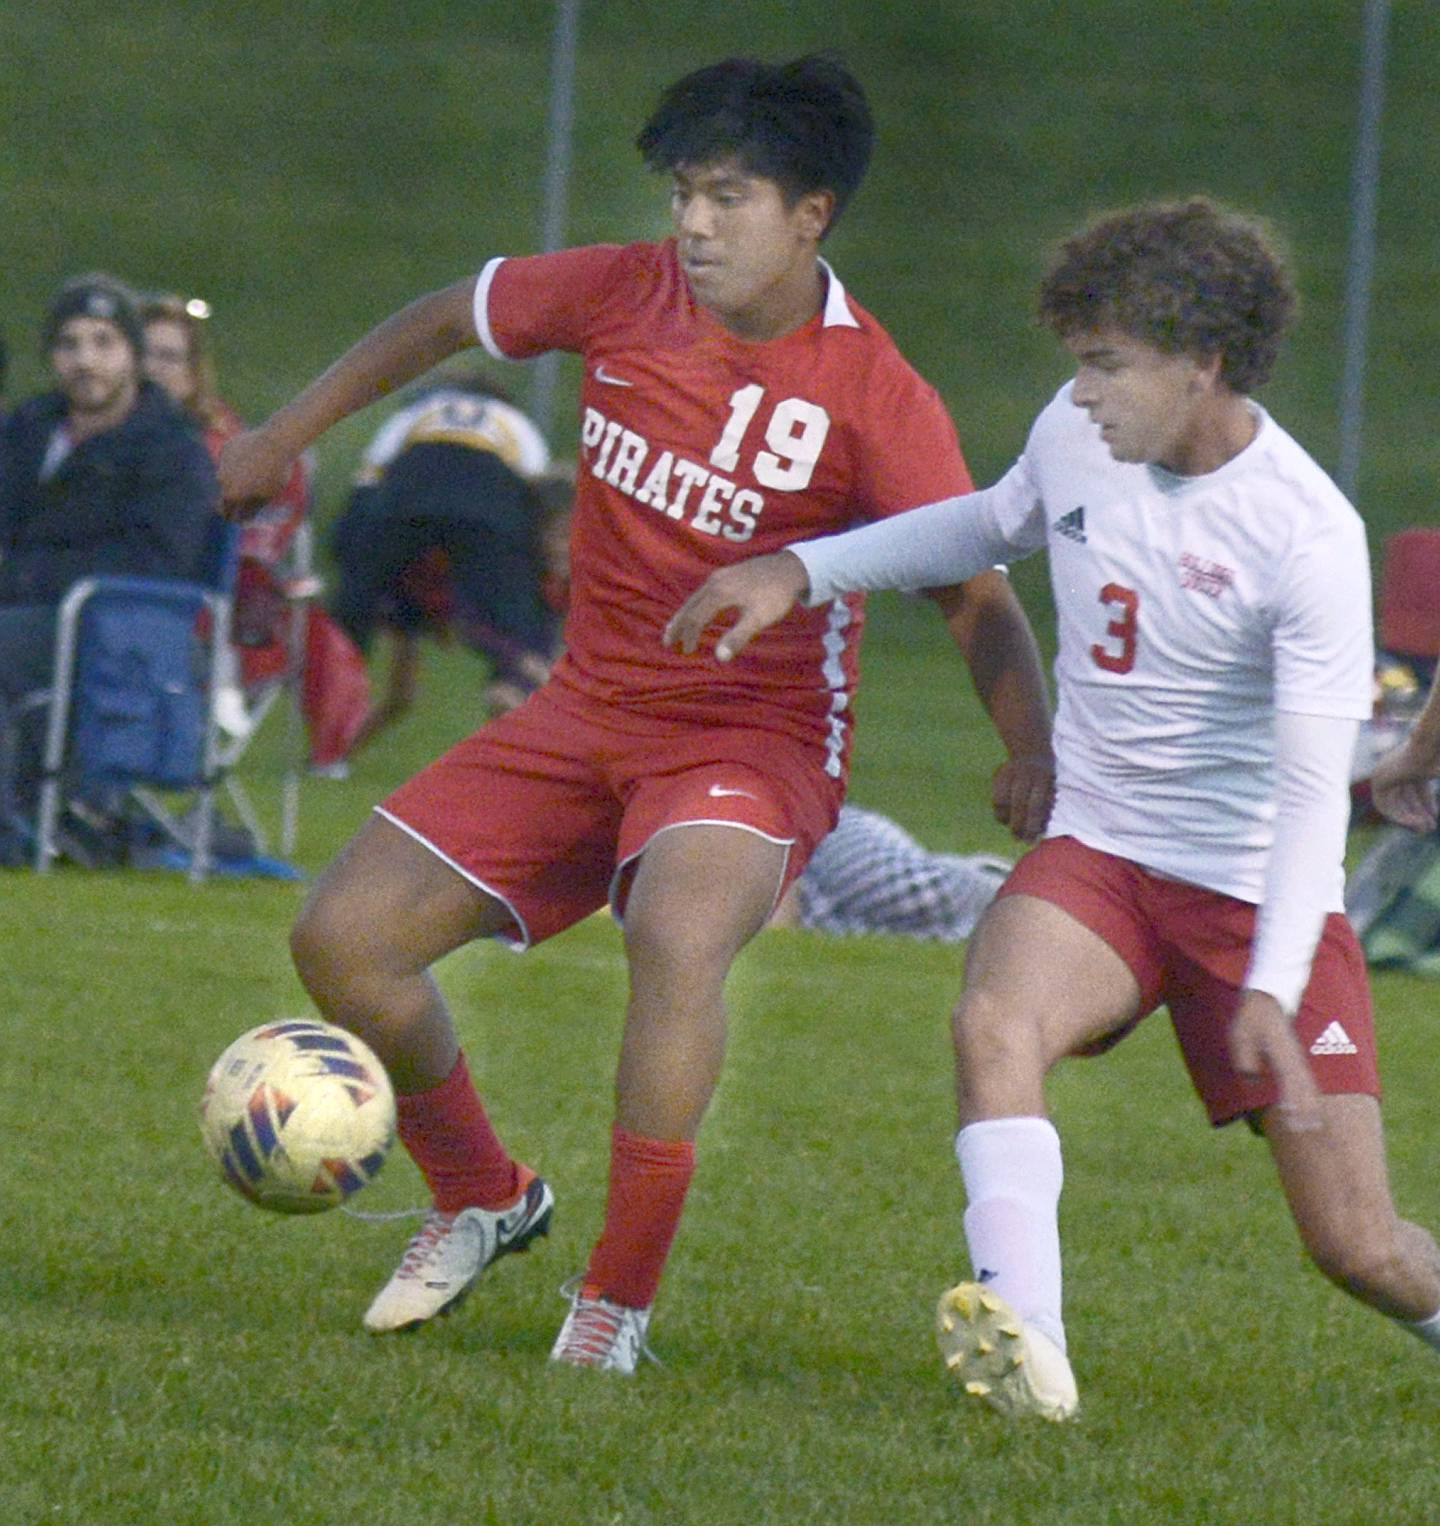 Ottawa’s Joan Gutierrez fights for control of the ball with Streator’s Moe Bacon during the first half of Tuesday's match at Ottawa.